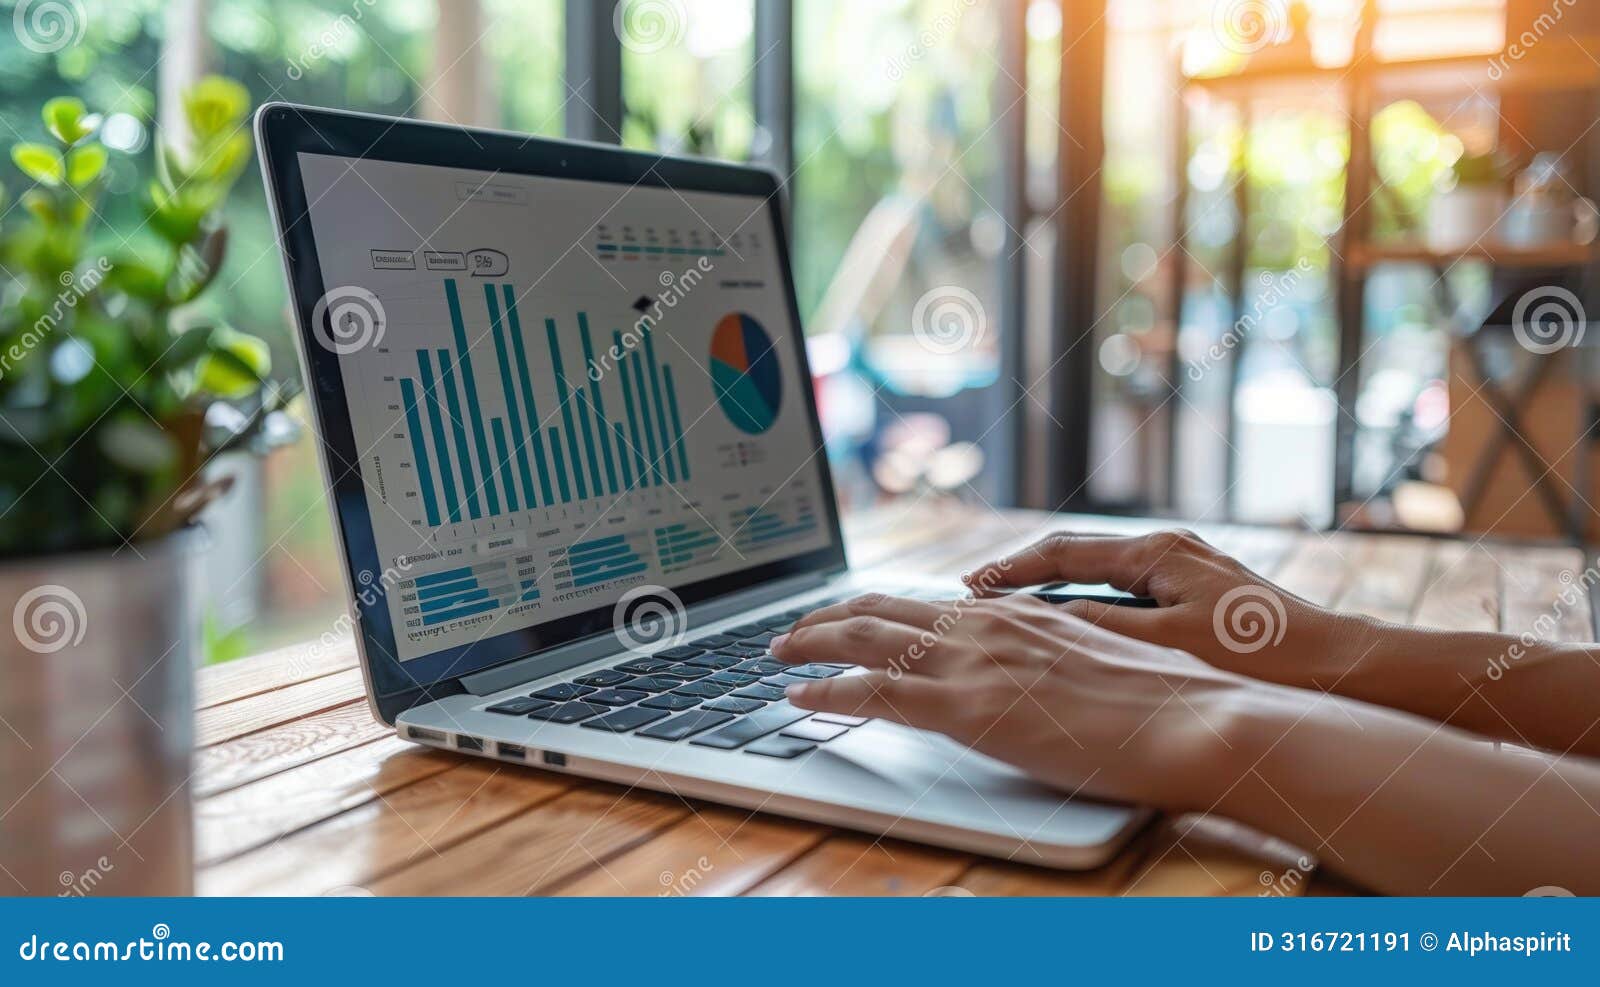 close-up of a freelancer's hands analyzing bar graphs and pie charts on a laptop screen